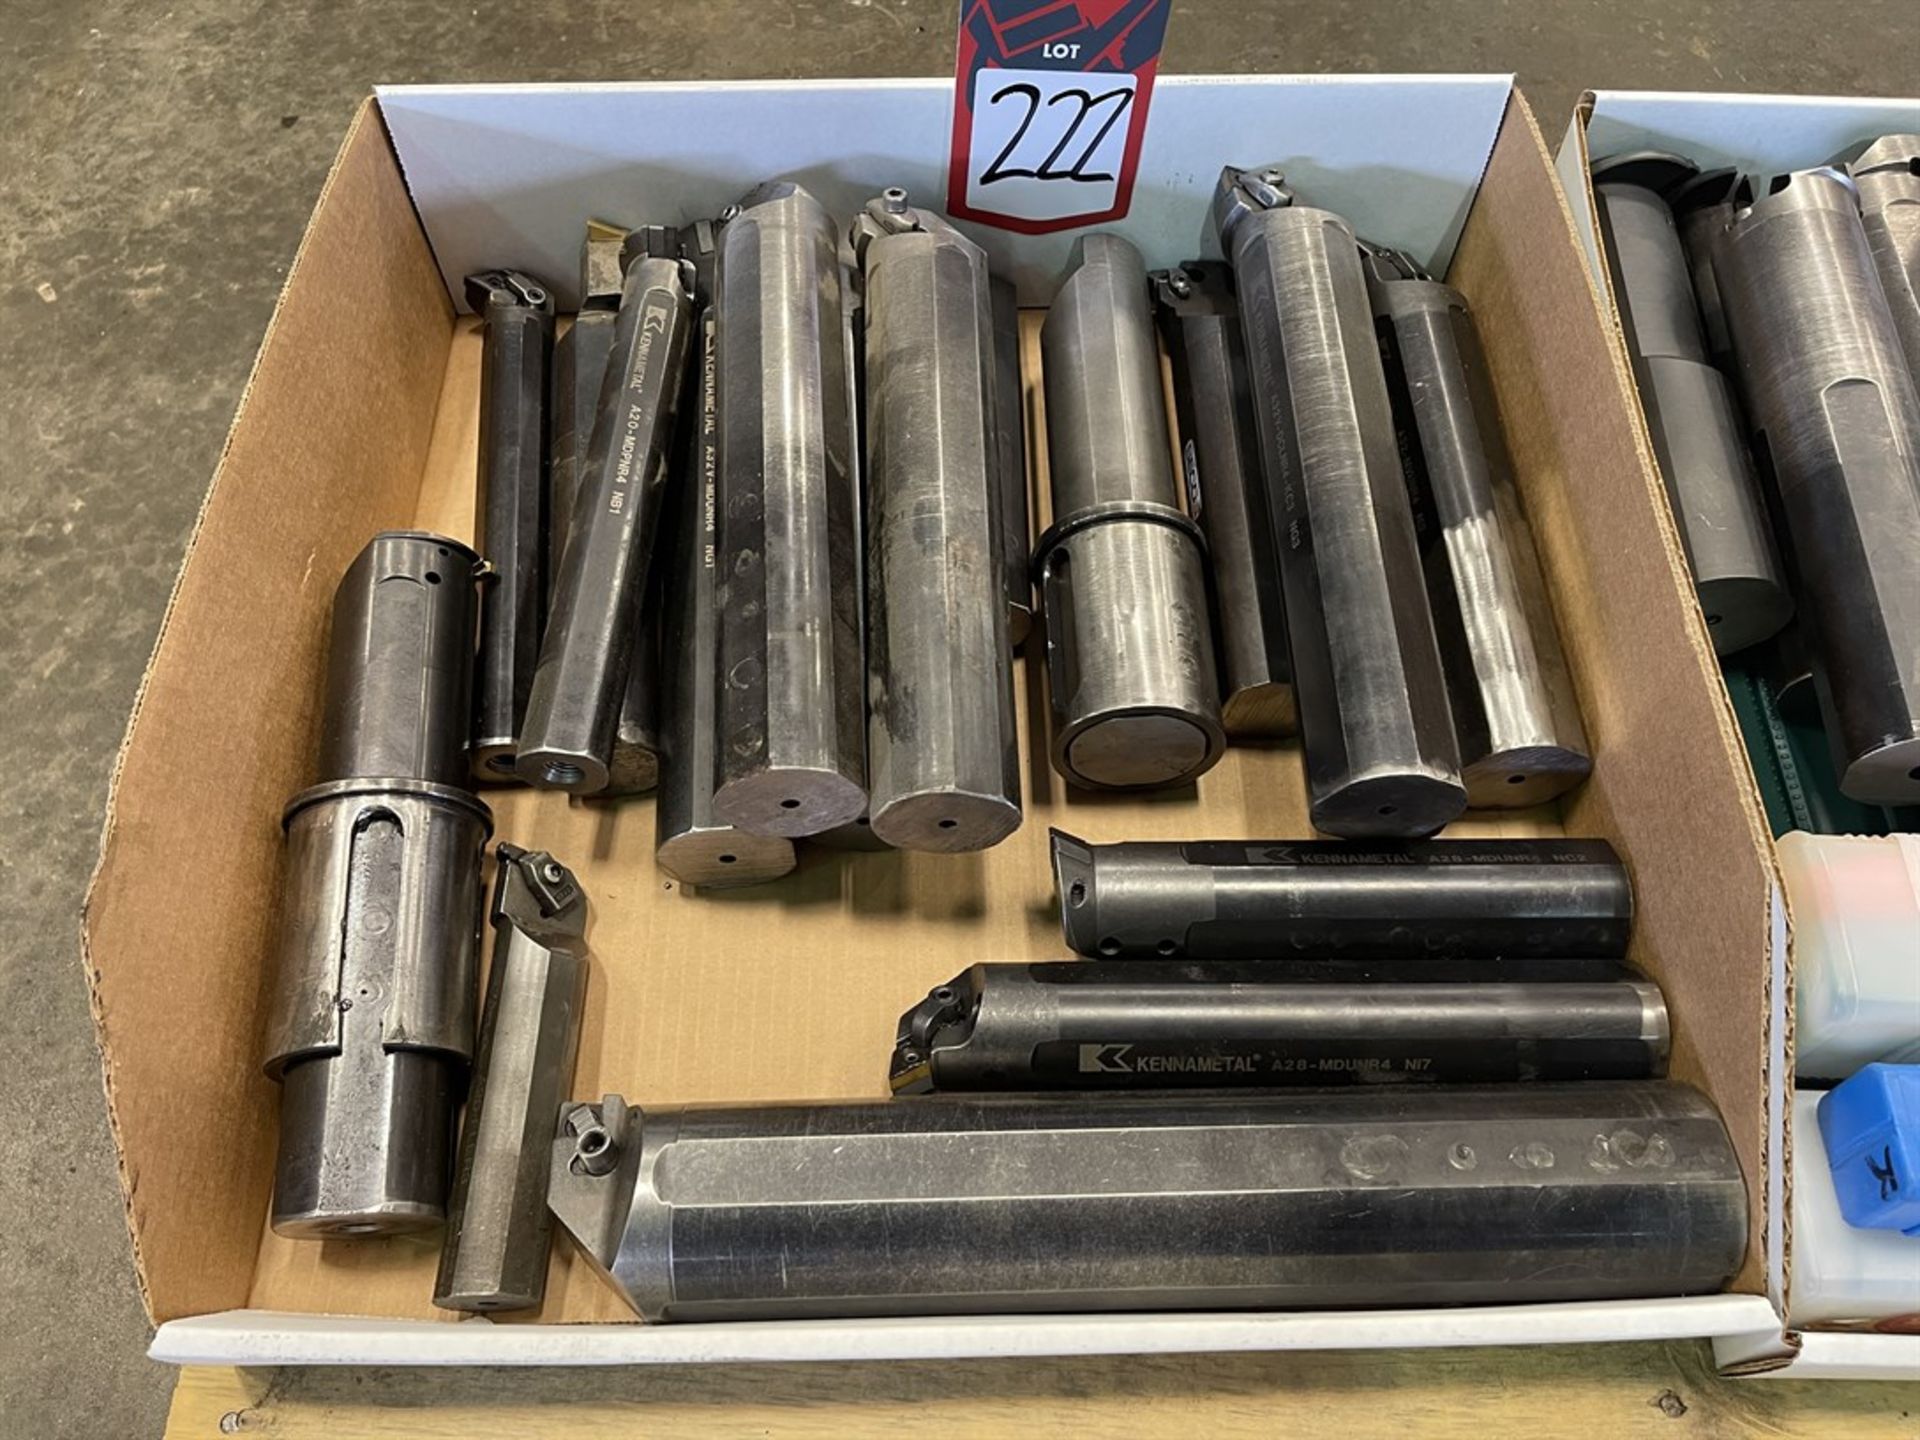 Lot of Assorted Indexable Carbide Boring Bars